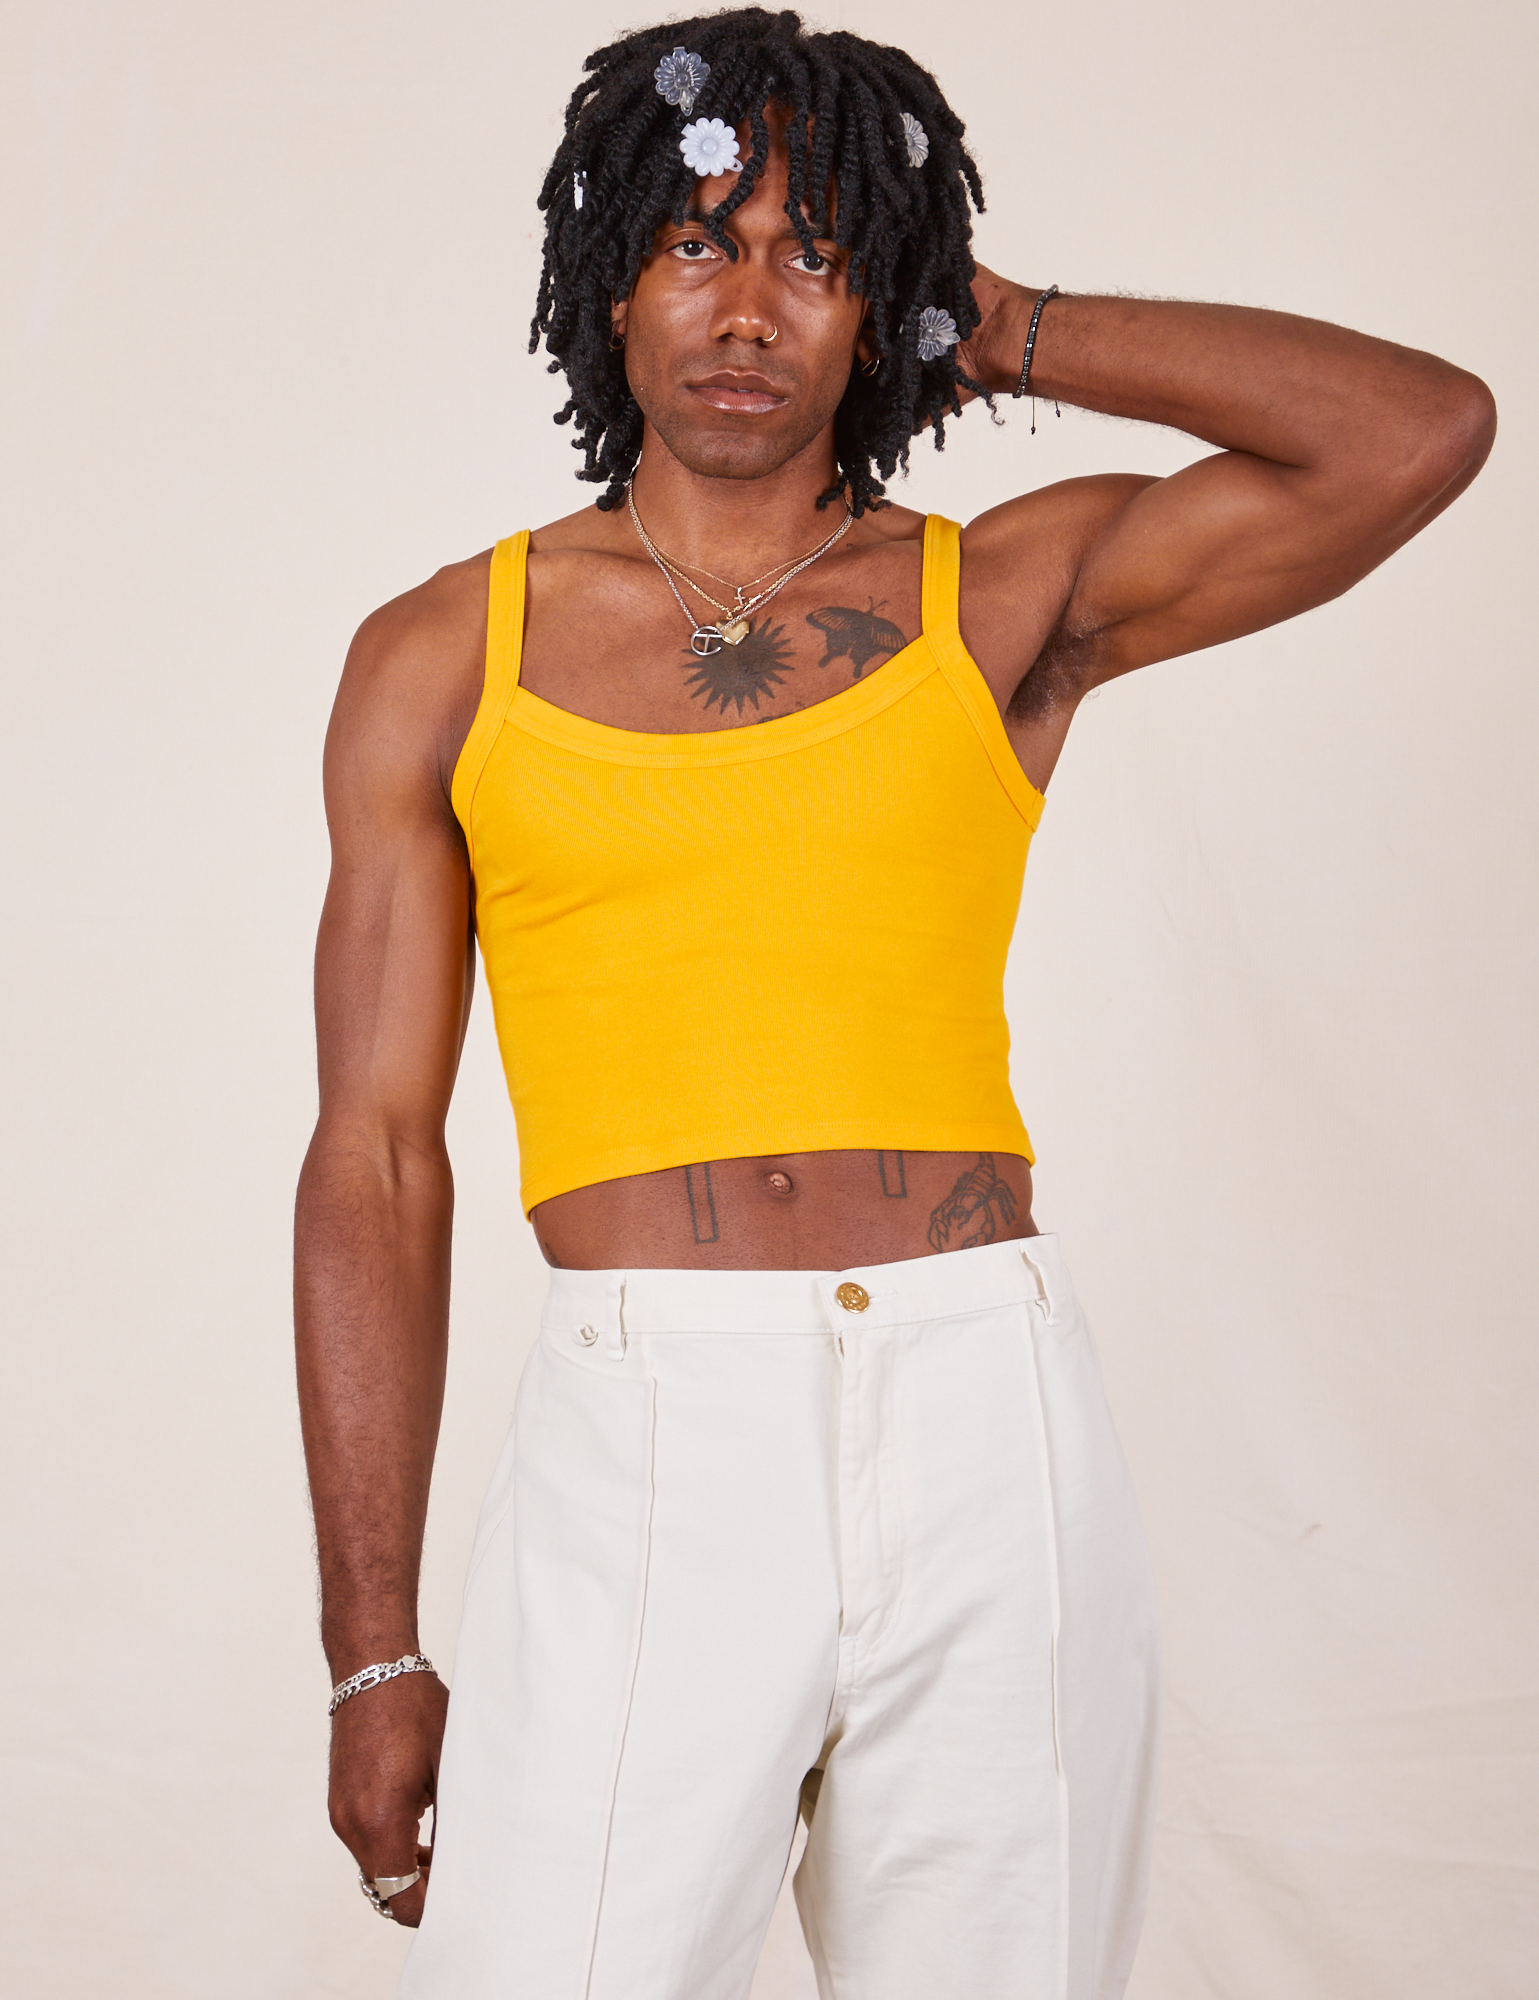 Jerrod is 6&#39;3&quot; and wearing S Cropped Cami in Sunshine Yellow paired with vintage off-white Western Pants